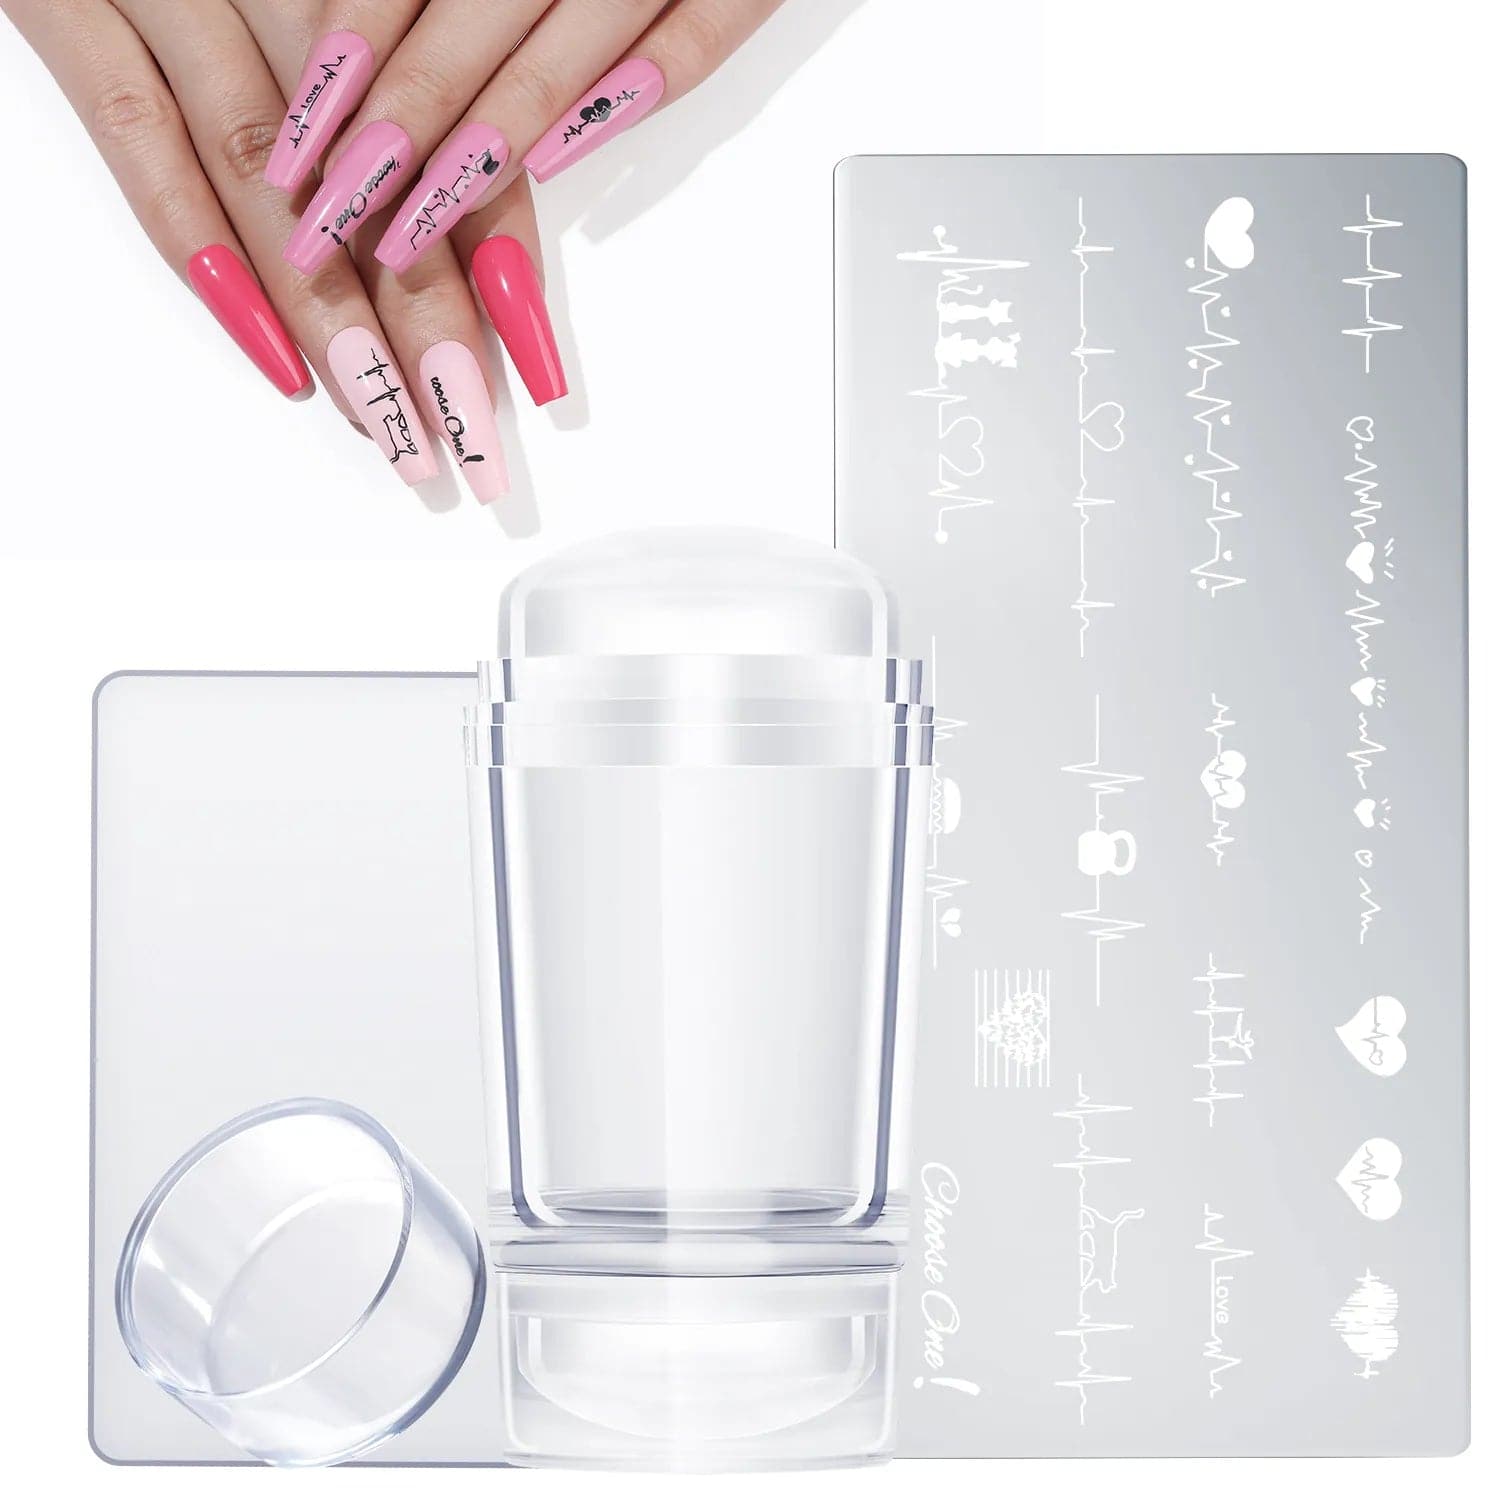 Heartbeat - Nail Stamping Plates